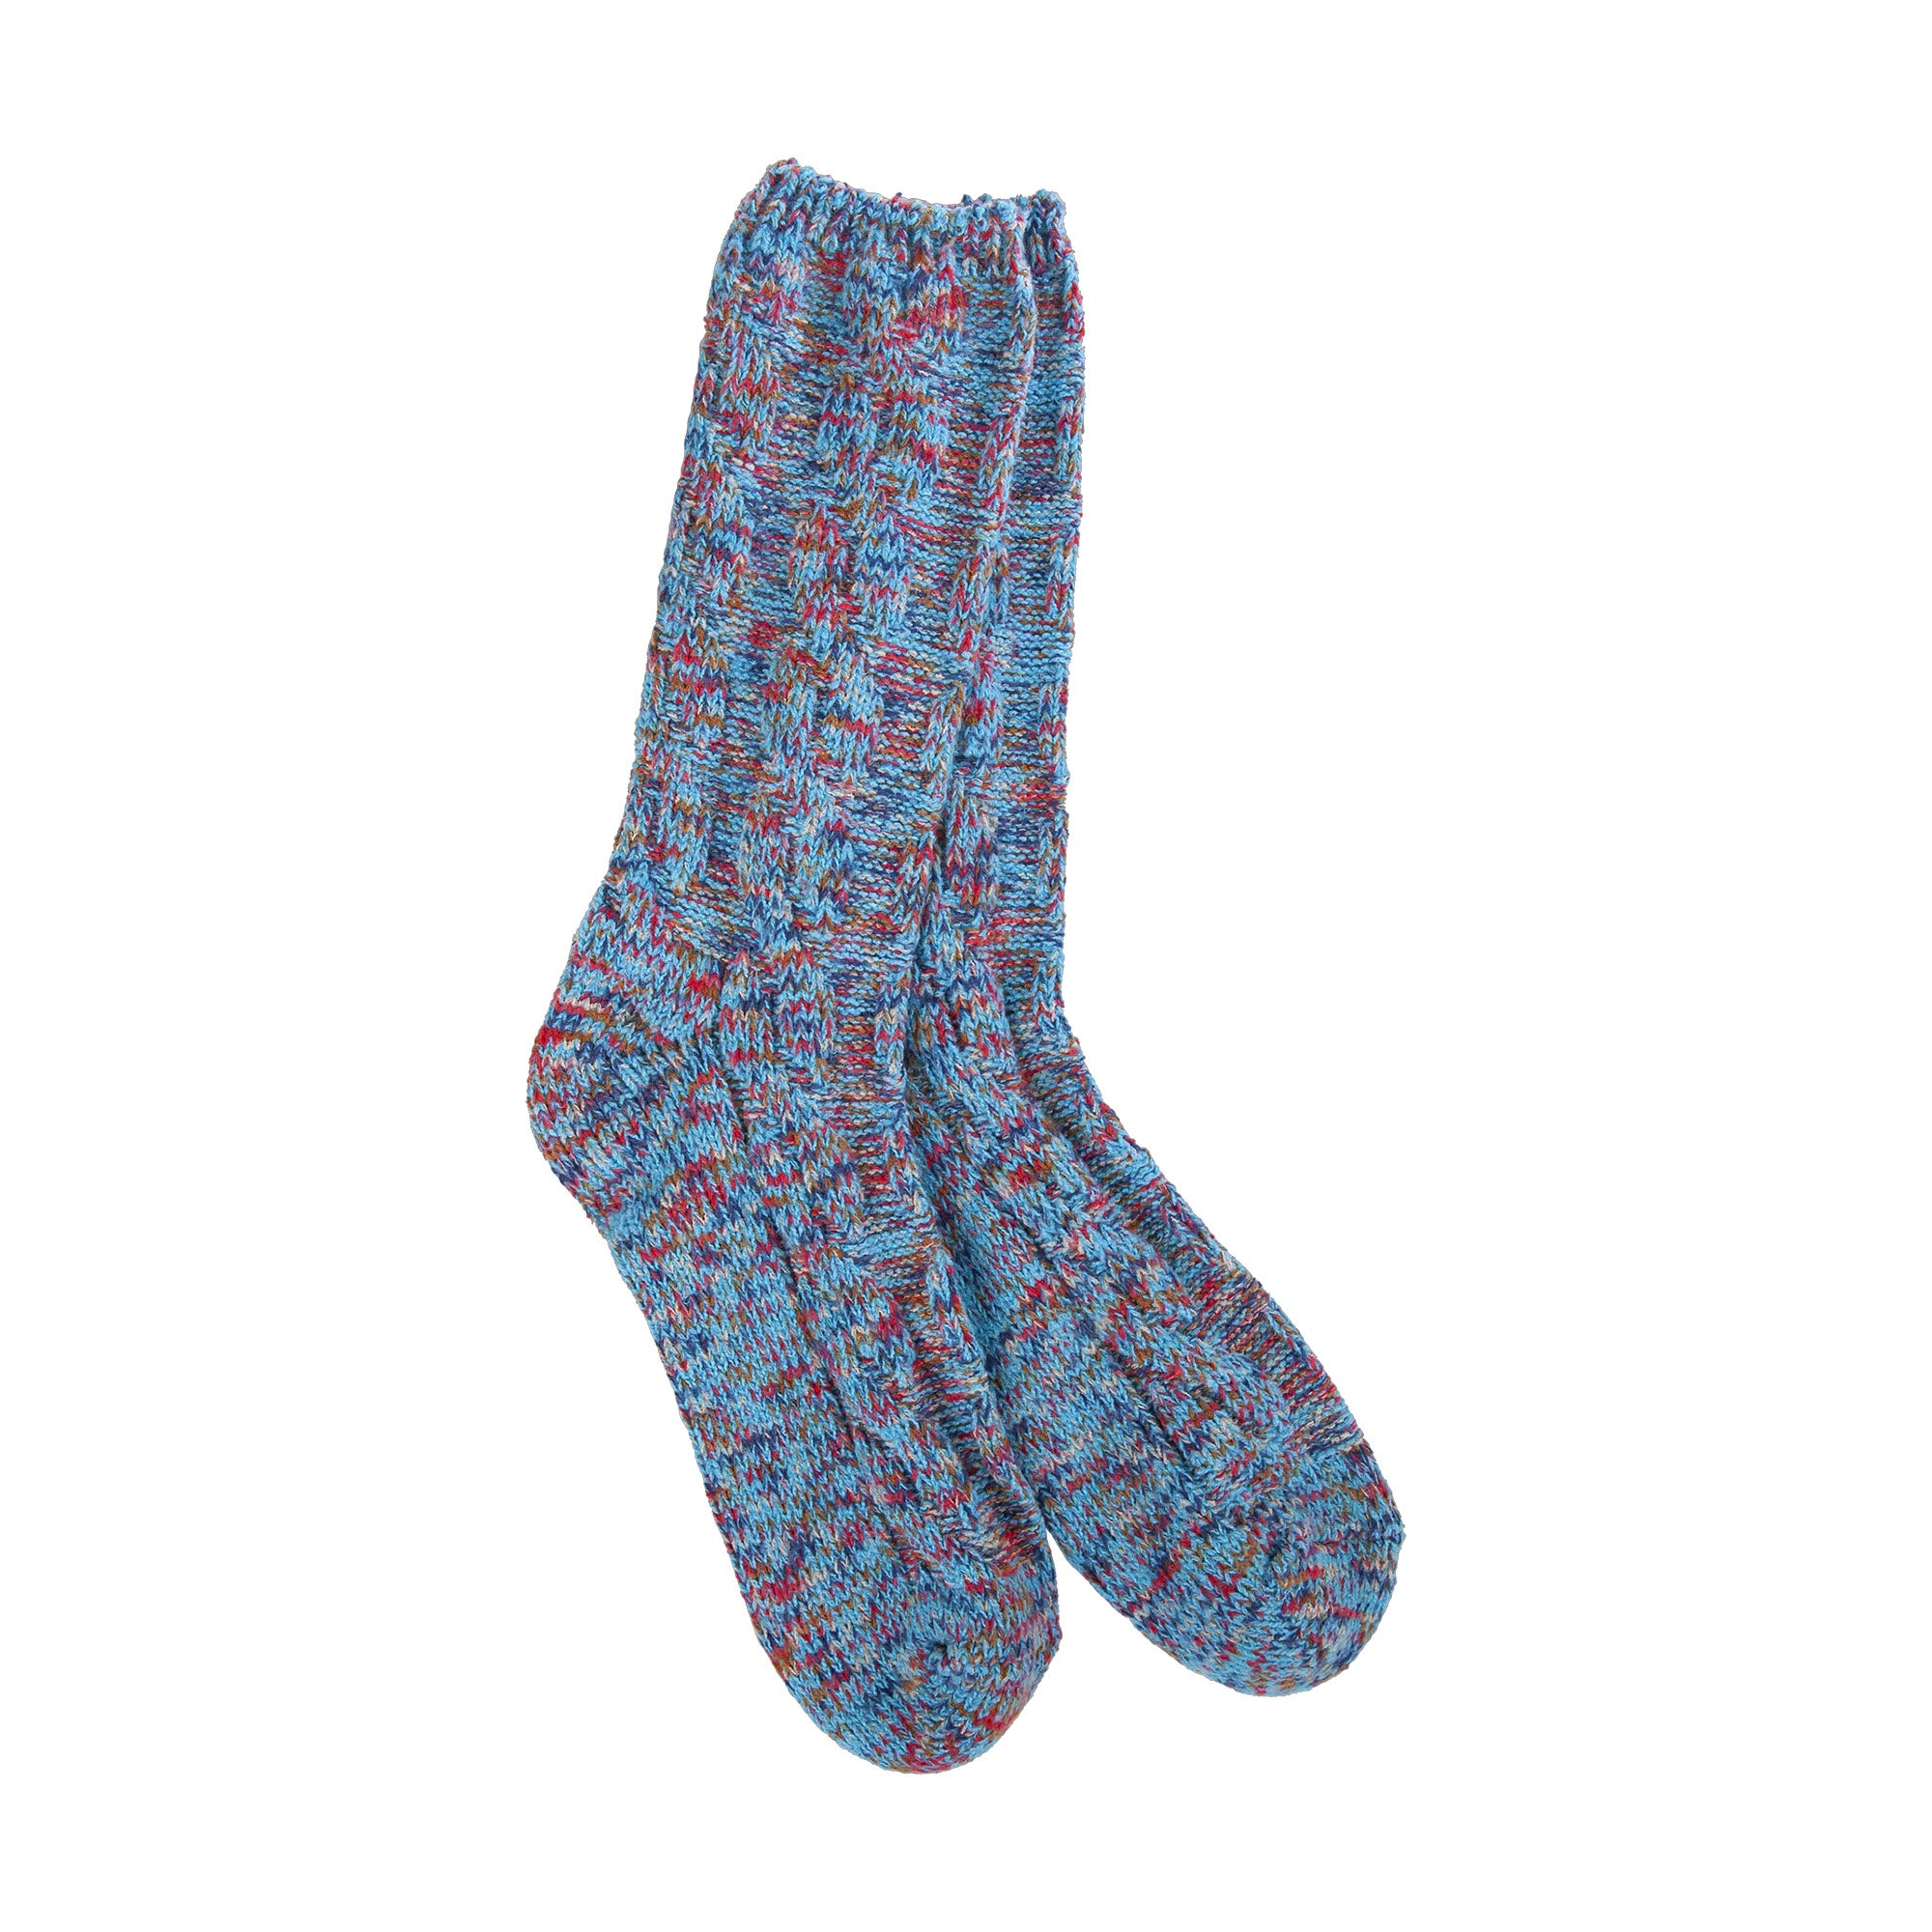 A pair of stylish, knitted socks from the Worlds Softest Ragg Cable Crew Socks Harmony, with a blue and red speckled pattern, displayed flat against a white background.